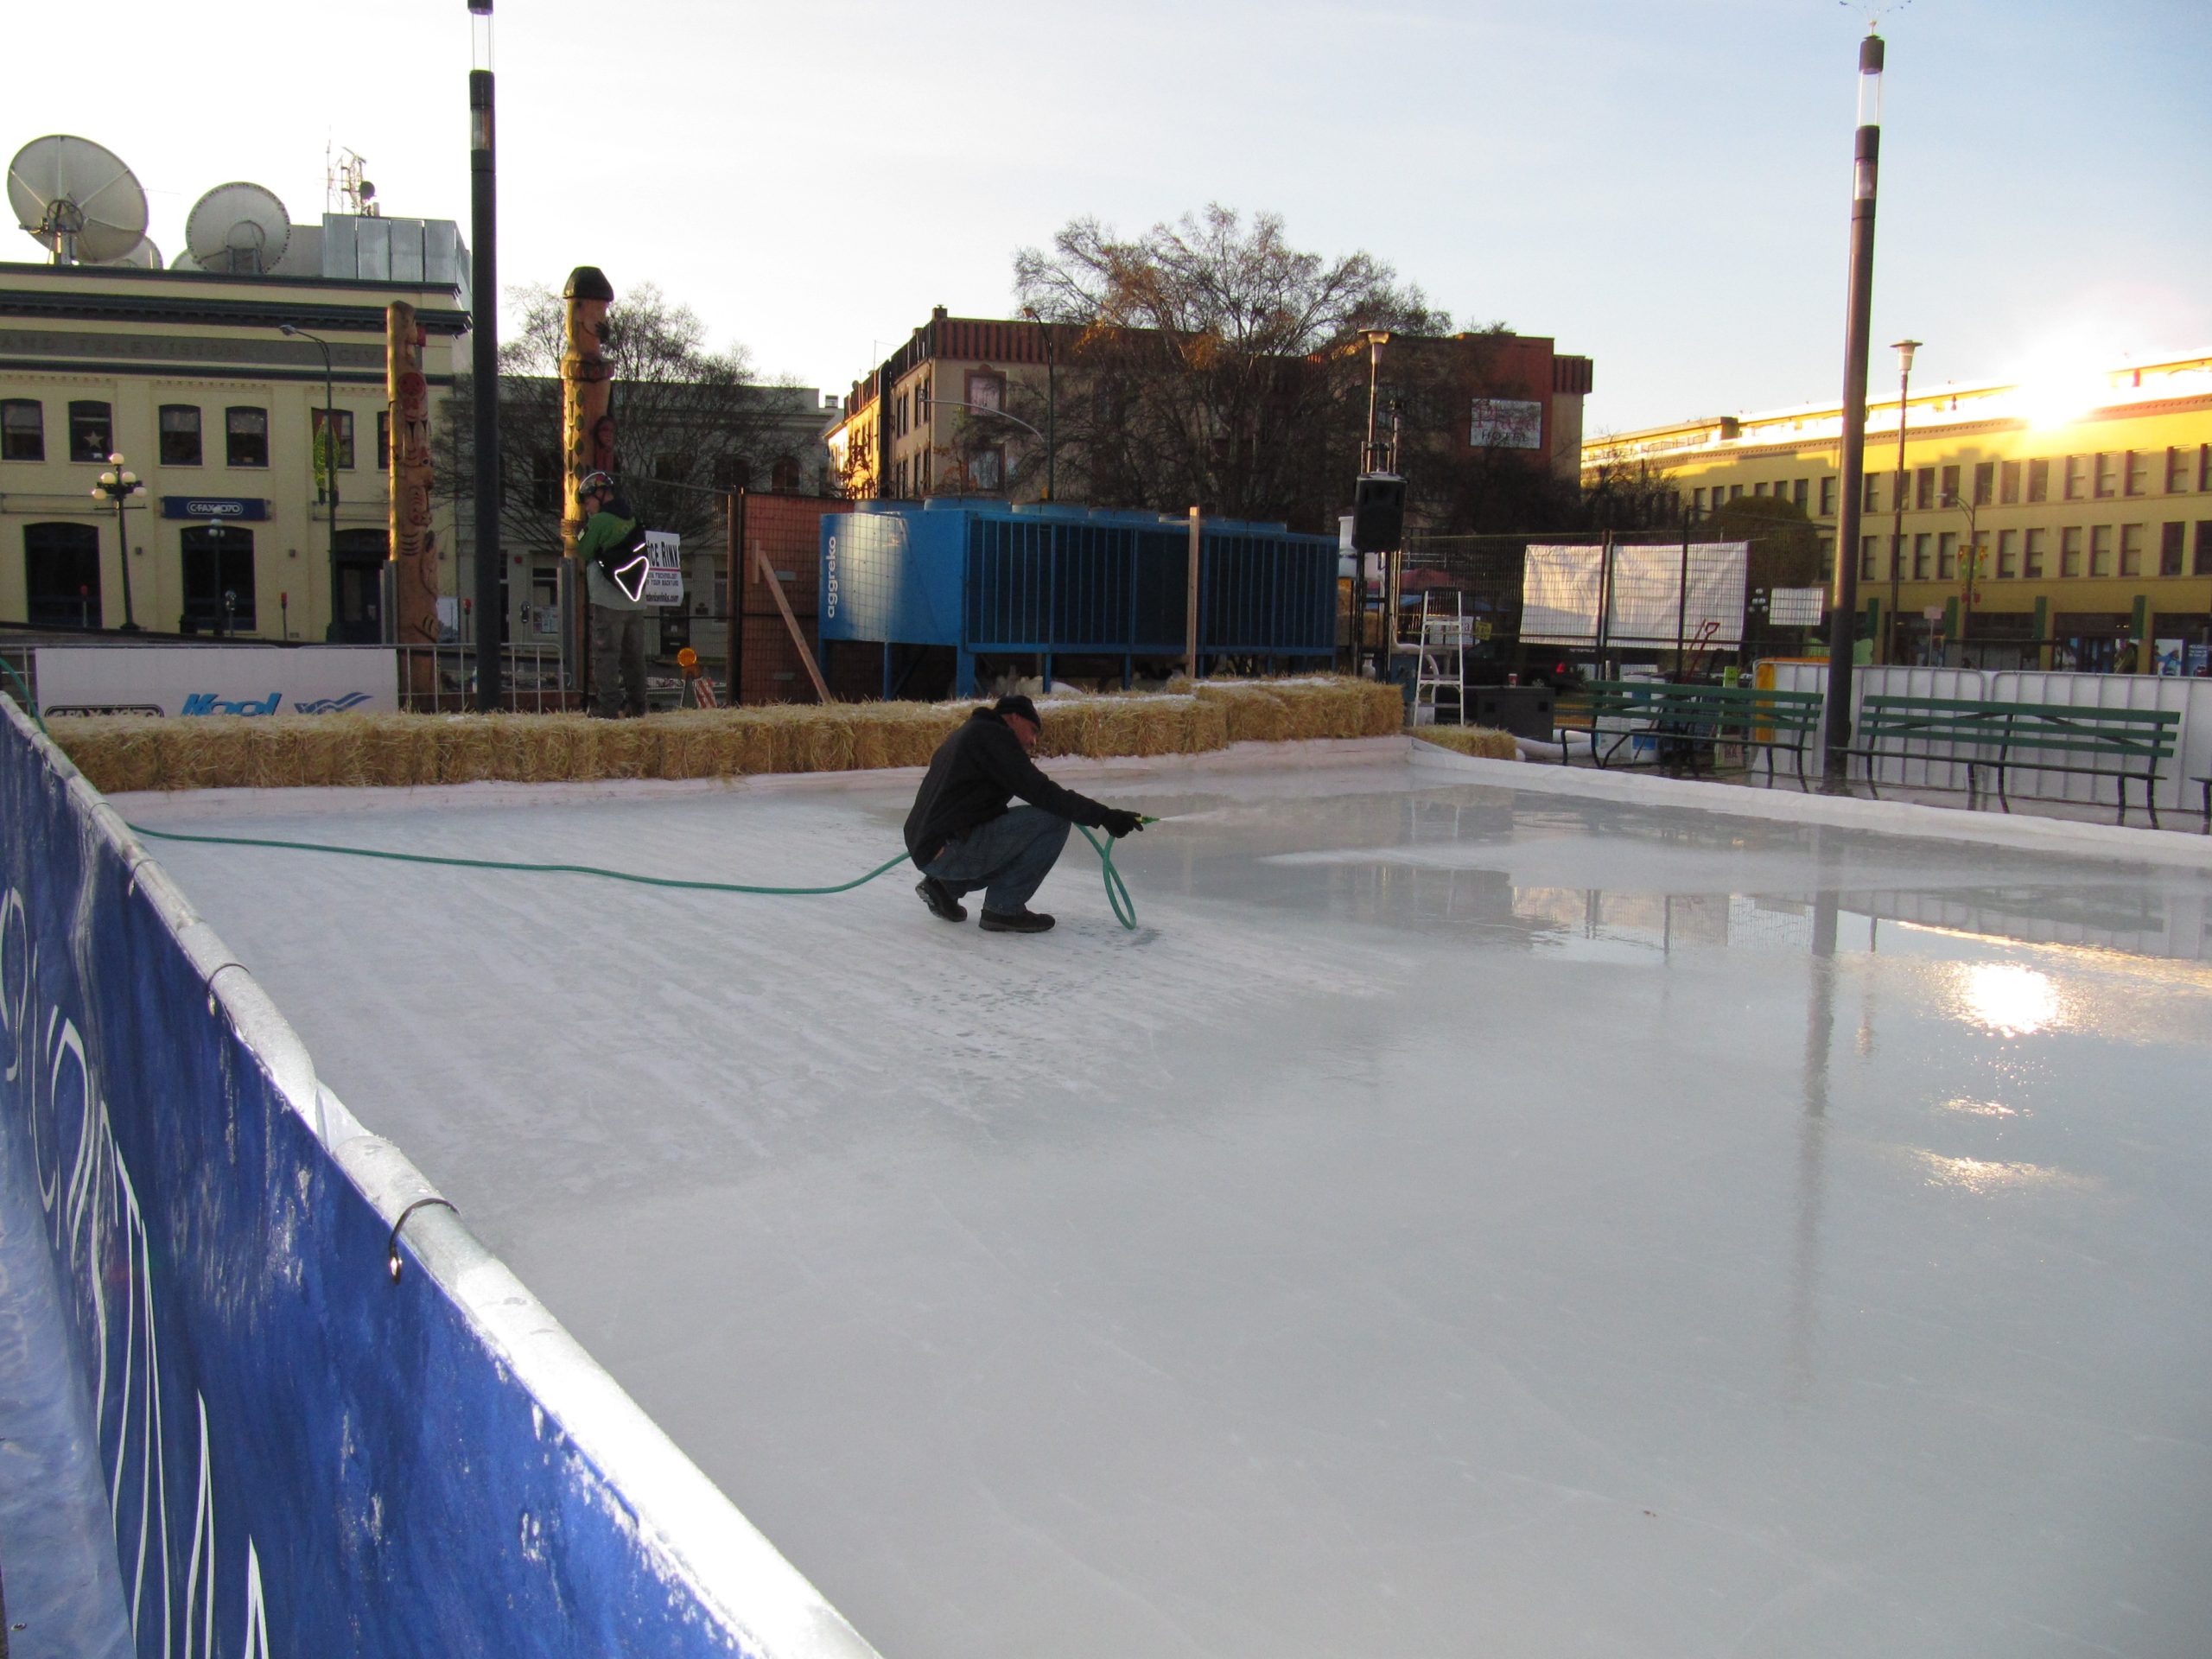 Centennial Square, Victoria BC outdoor refrigerated ice rink